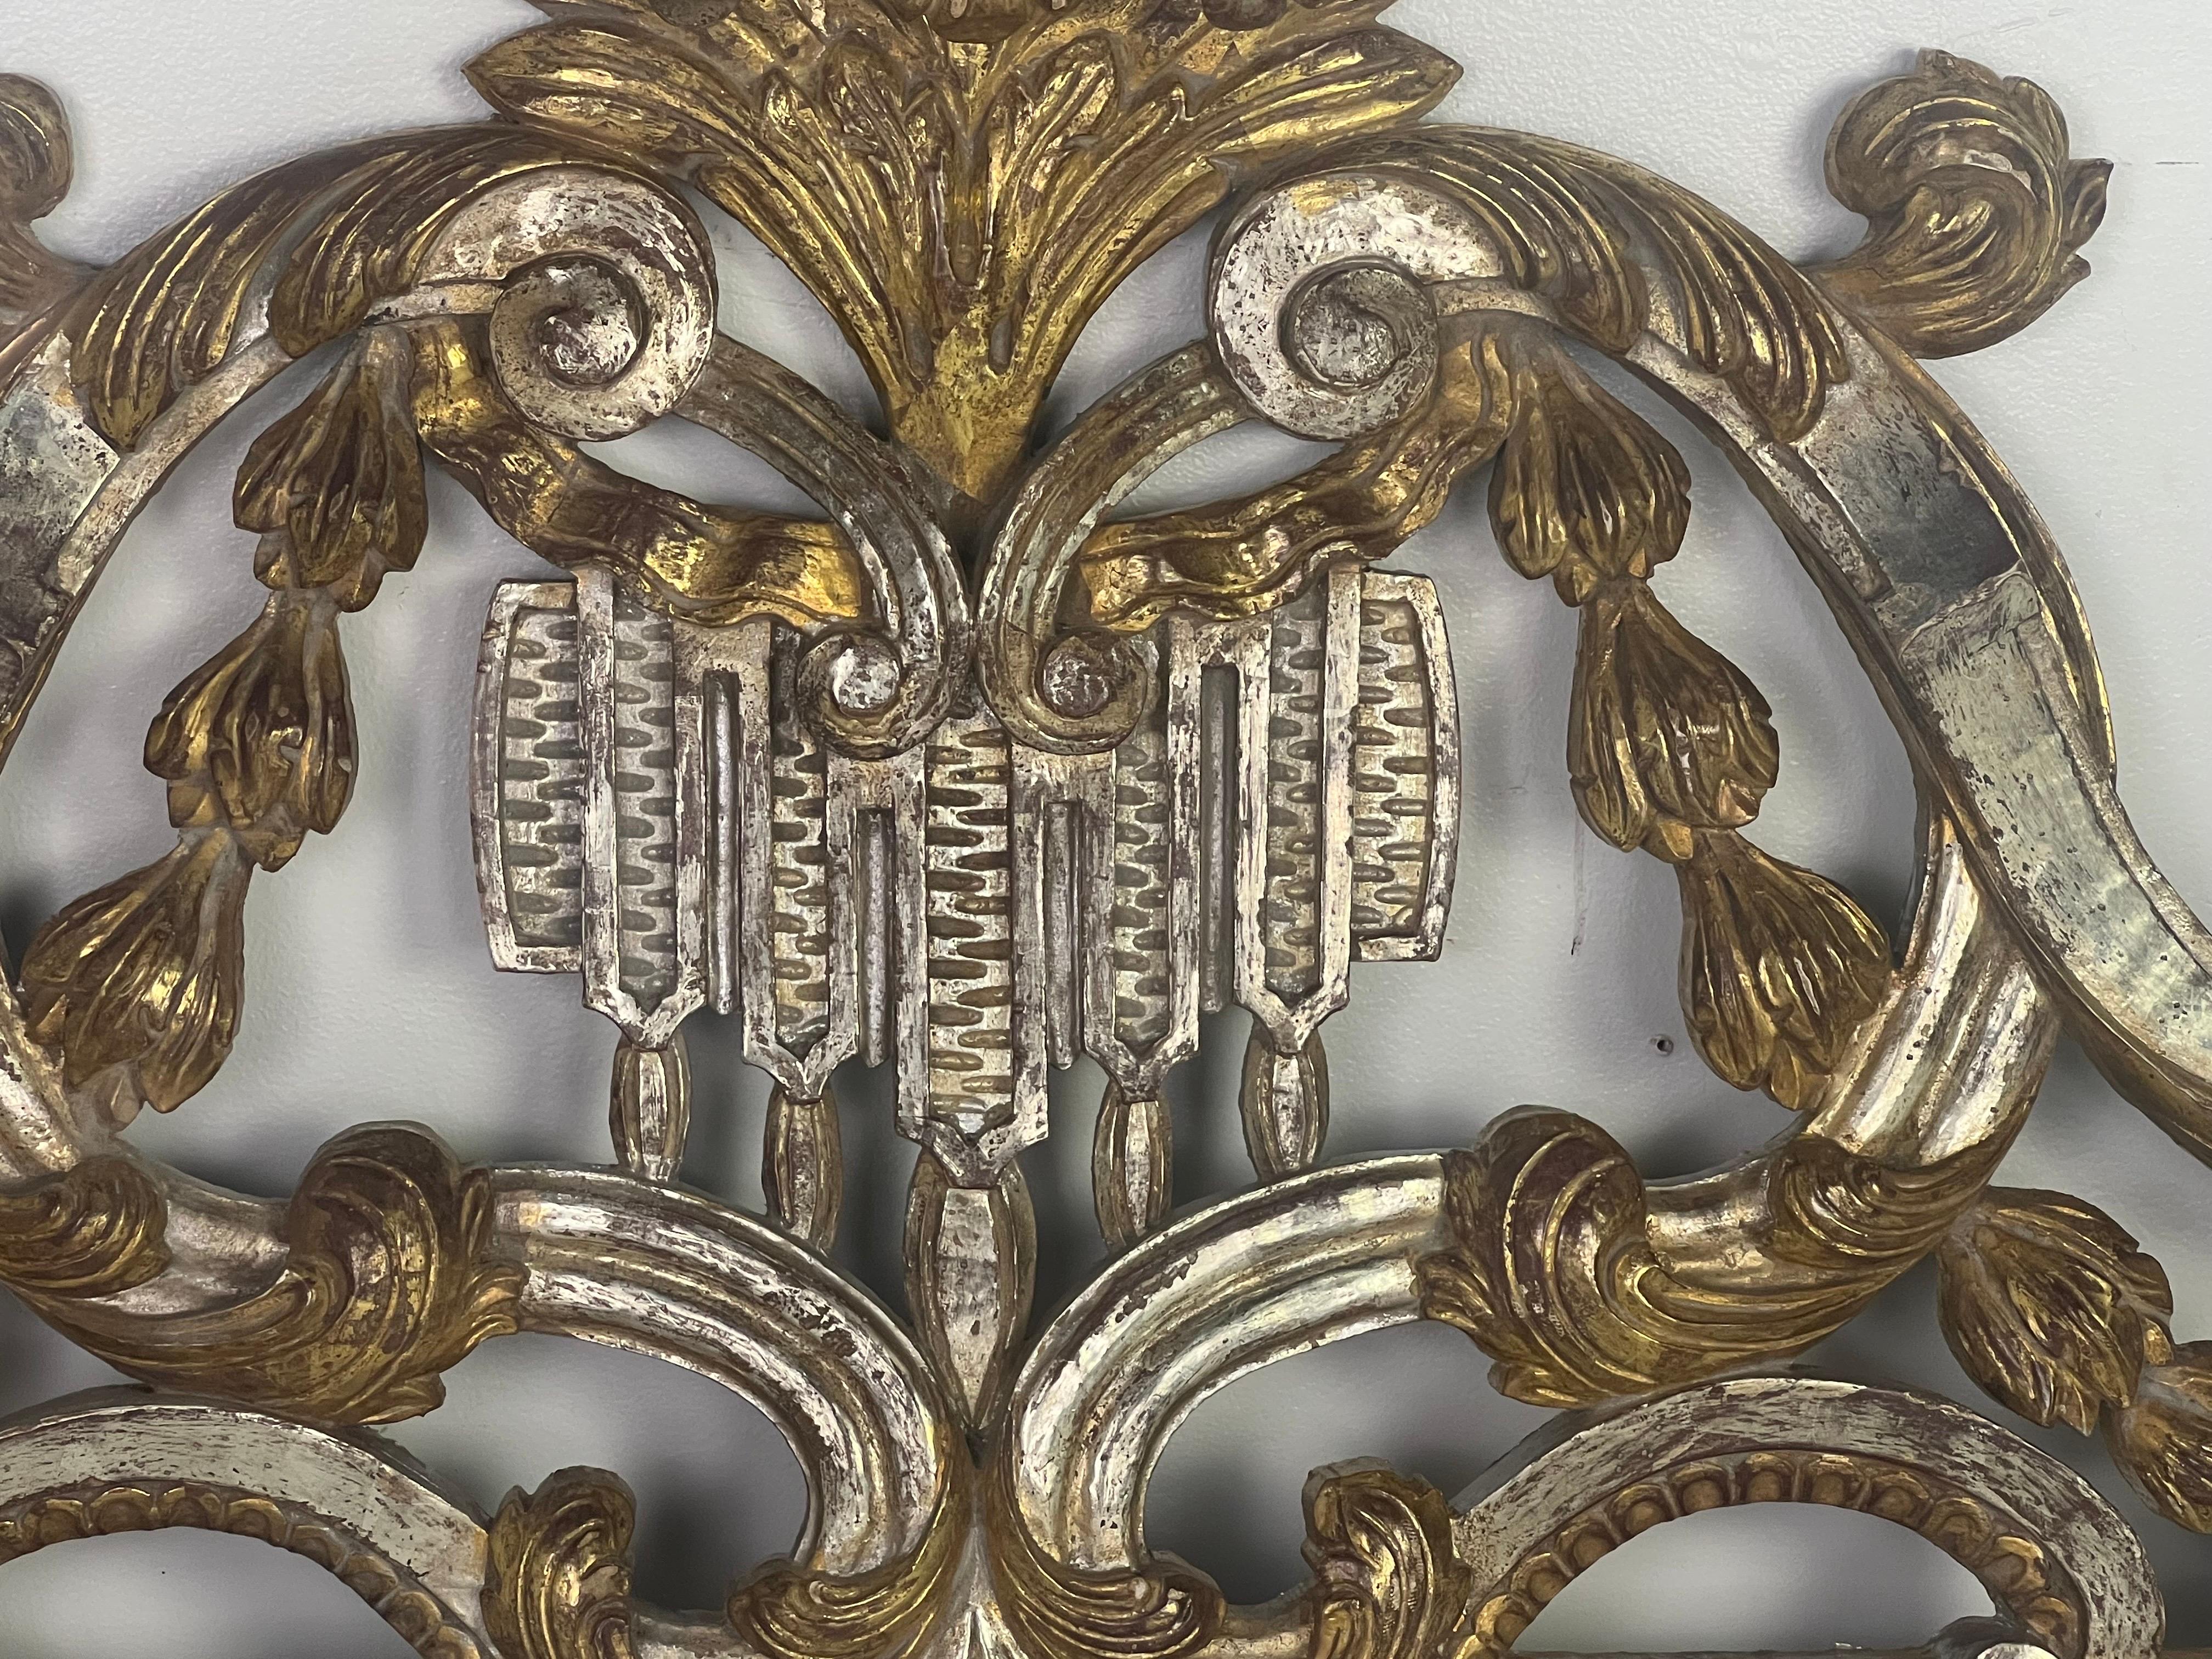 Gold Gilt and Silvered ornately carved architectural piece depicting both scrolls and acanthus leaves throughout.